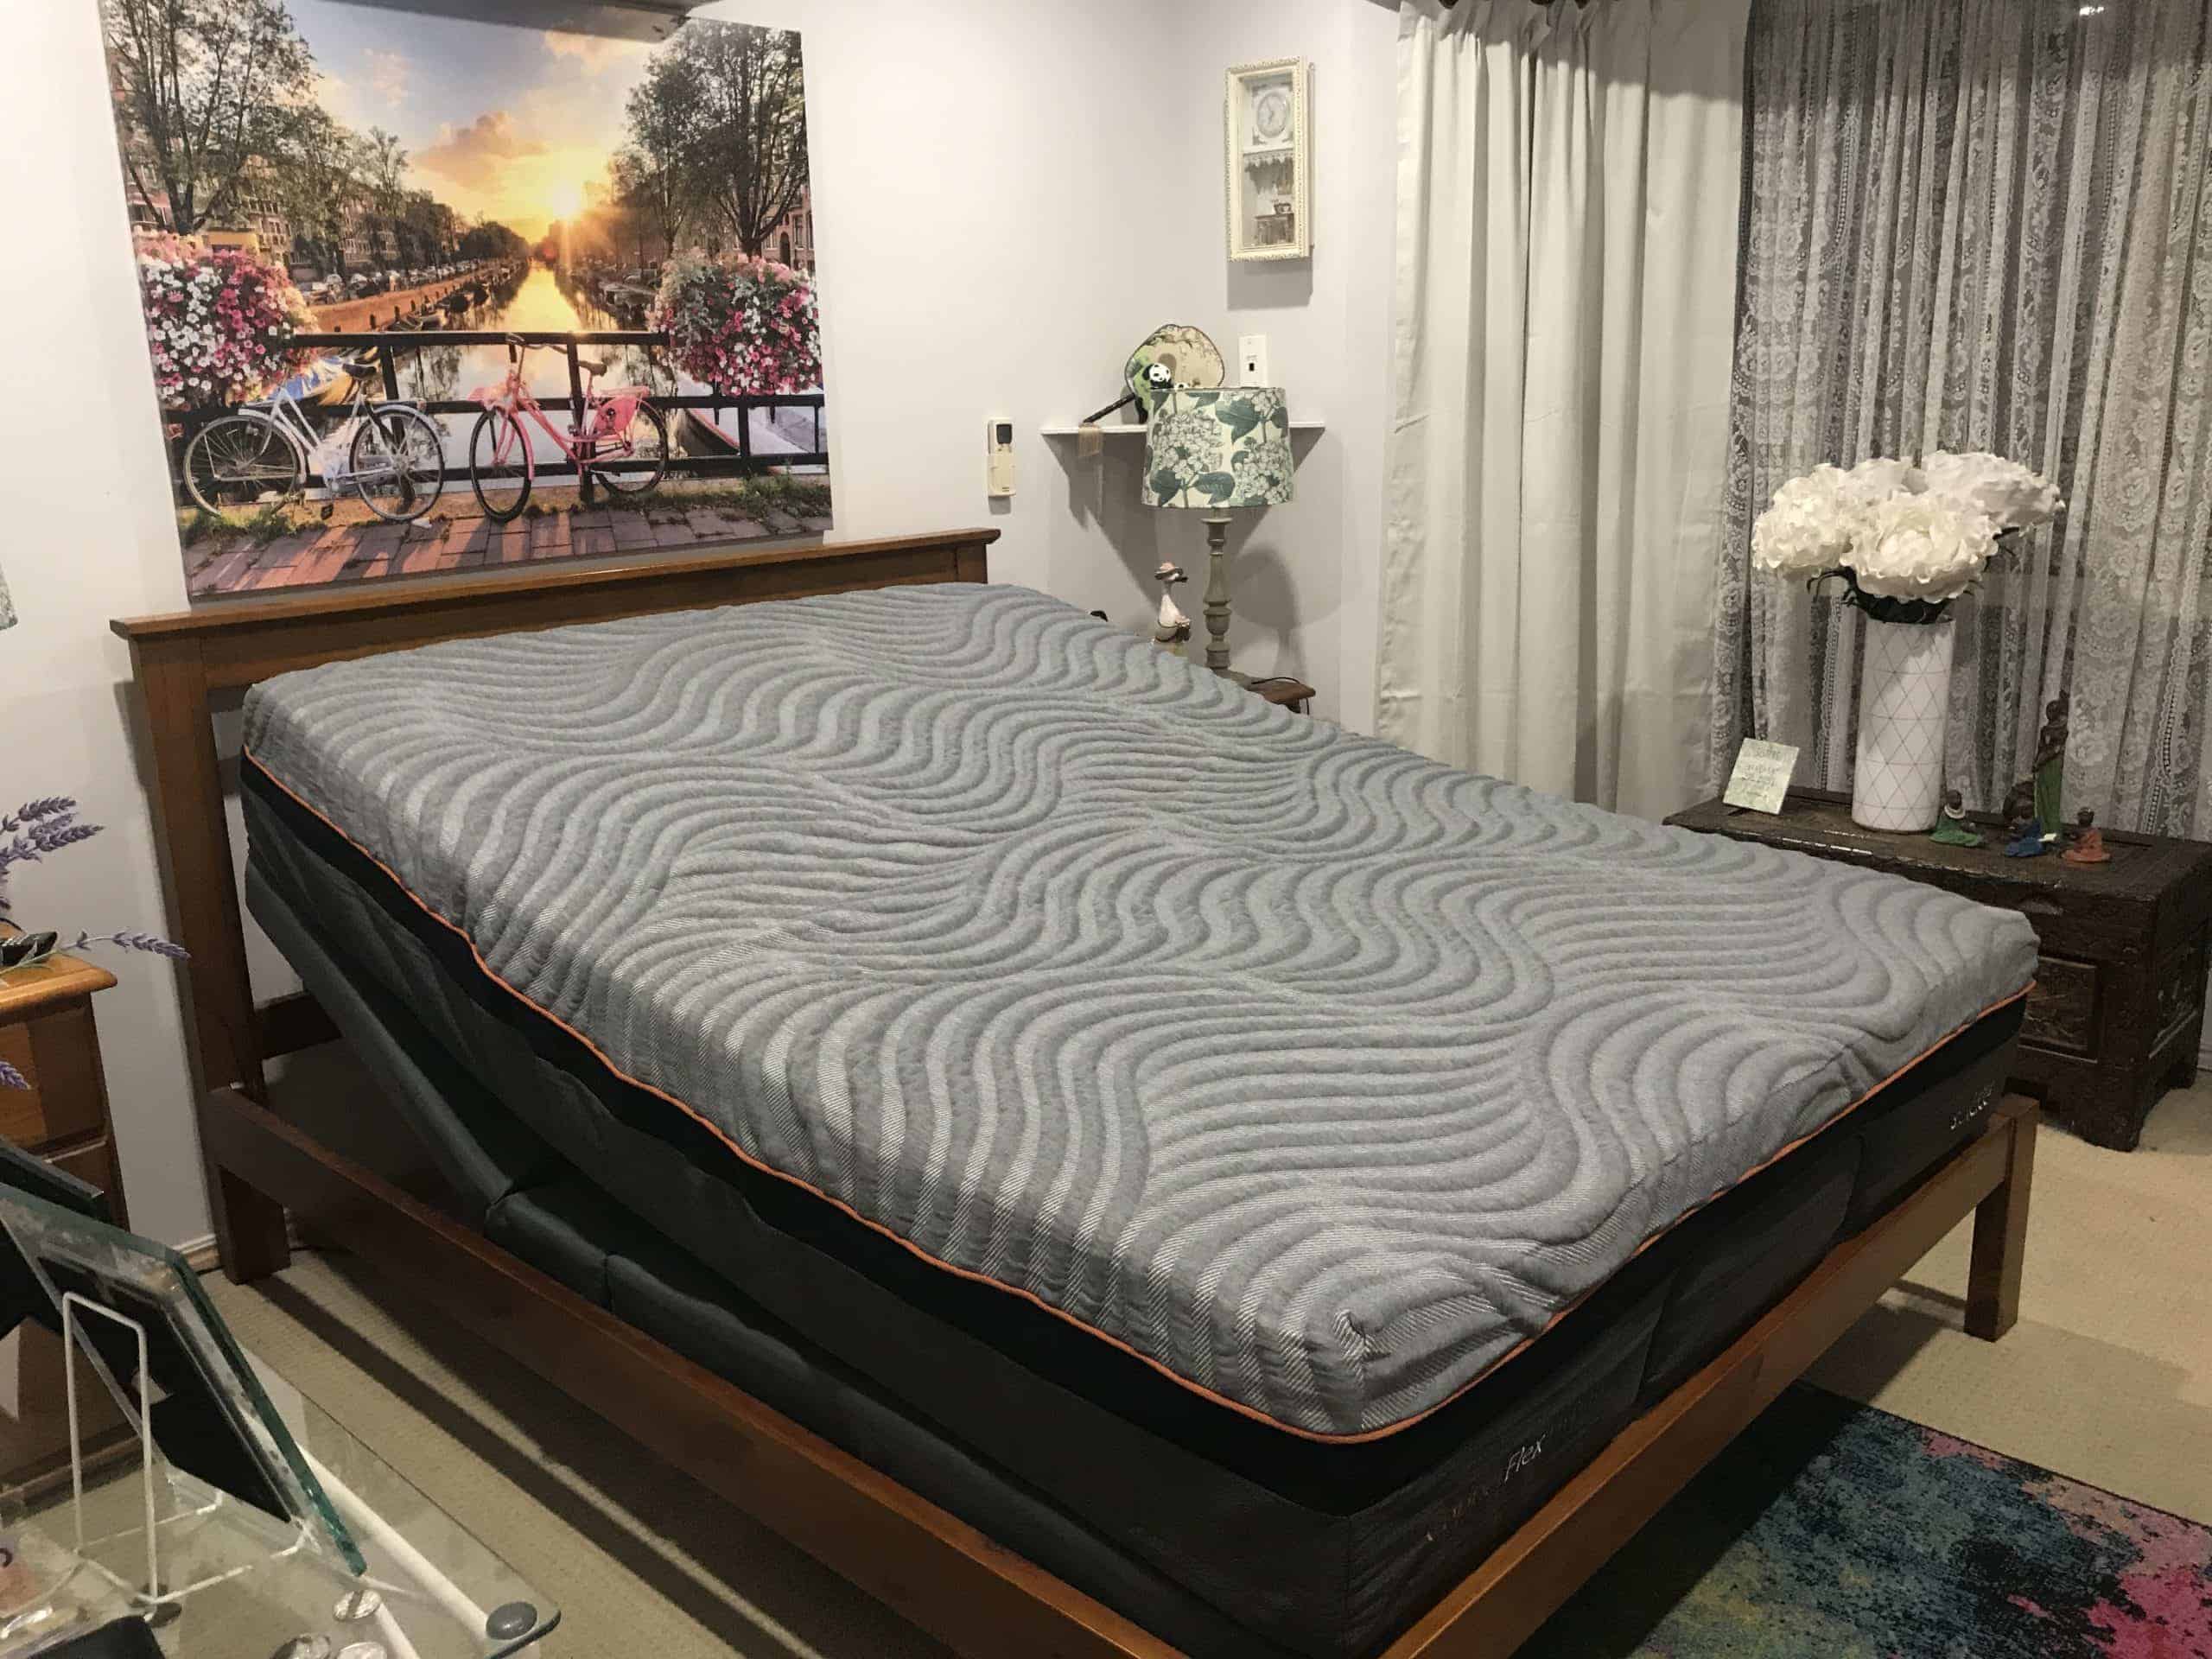 Solace Sleep adjustable bed review 6